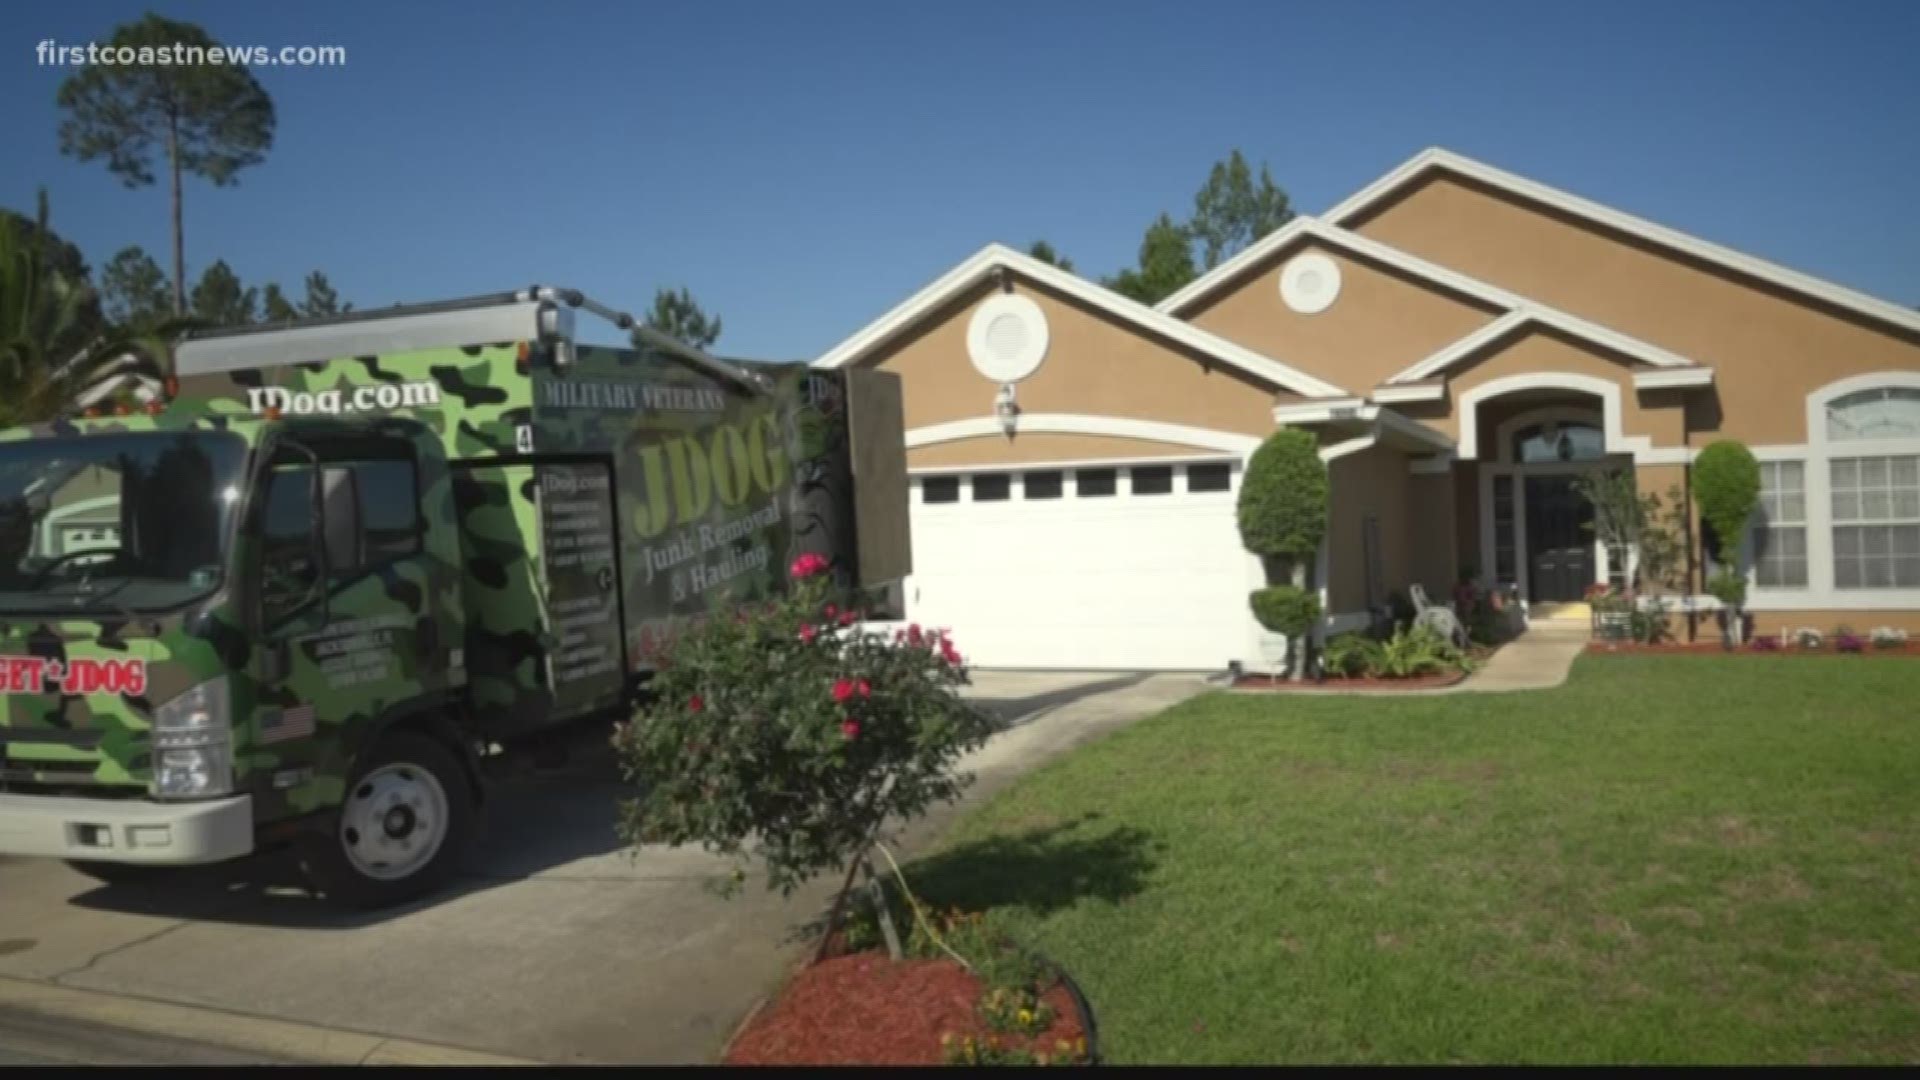 A local business that solely employs veterans and their families is giving back to the First Coast communities and keeping the Earth clean in the process.